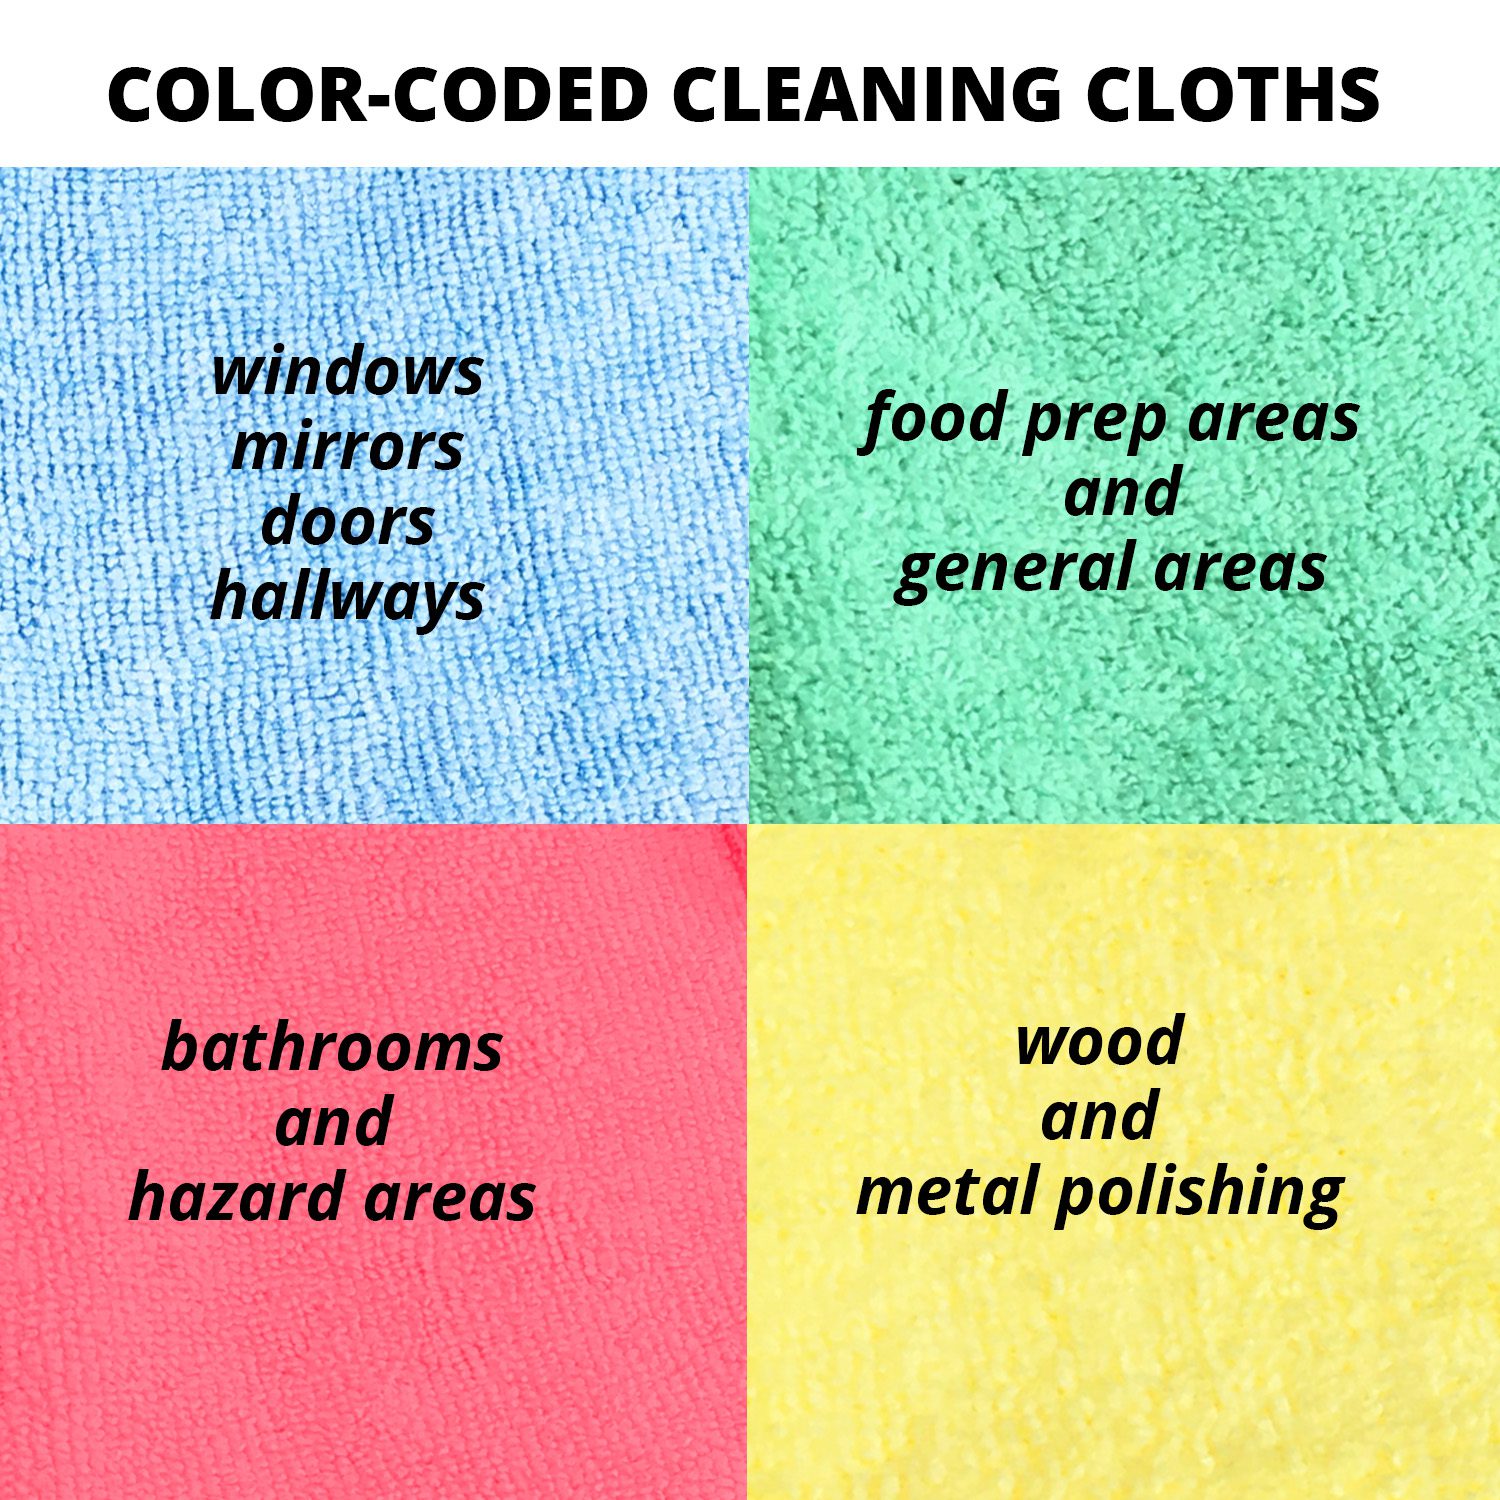 Prevent Cross-Contamination with Color-Coded Cleaning Tools